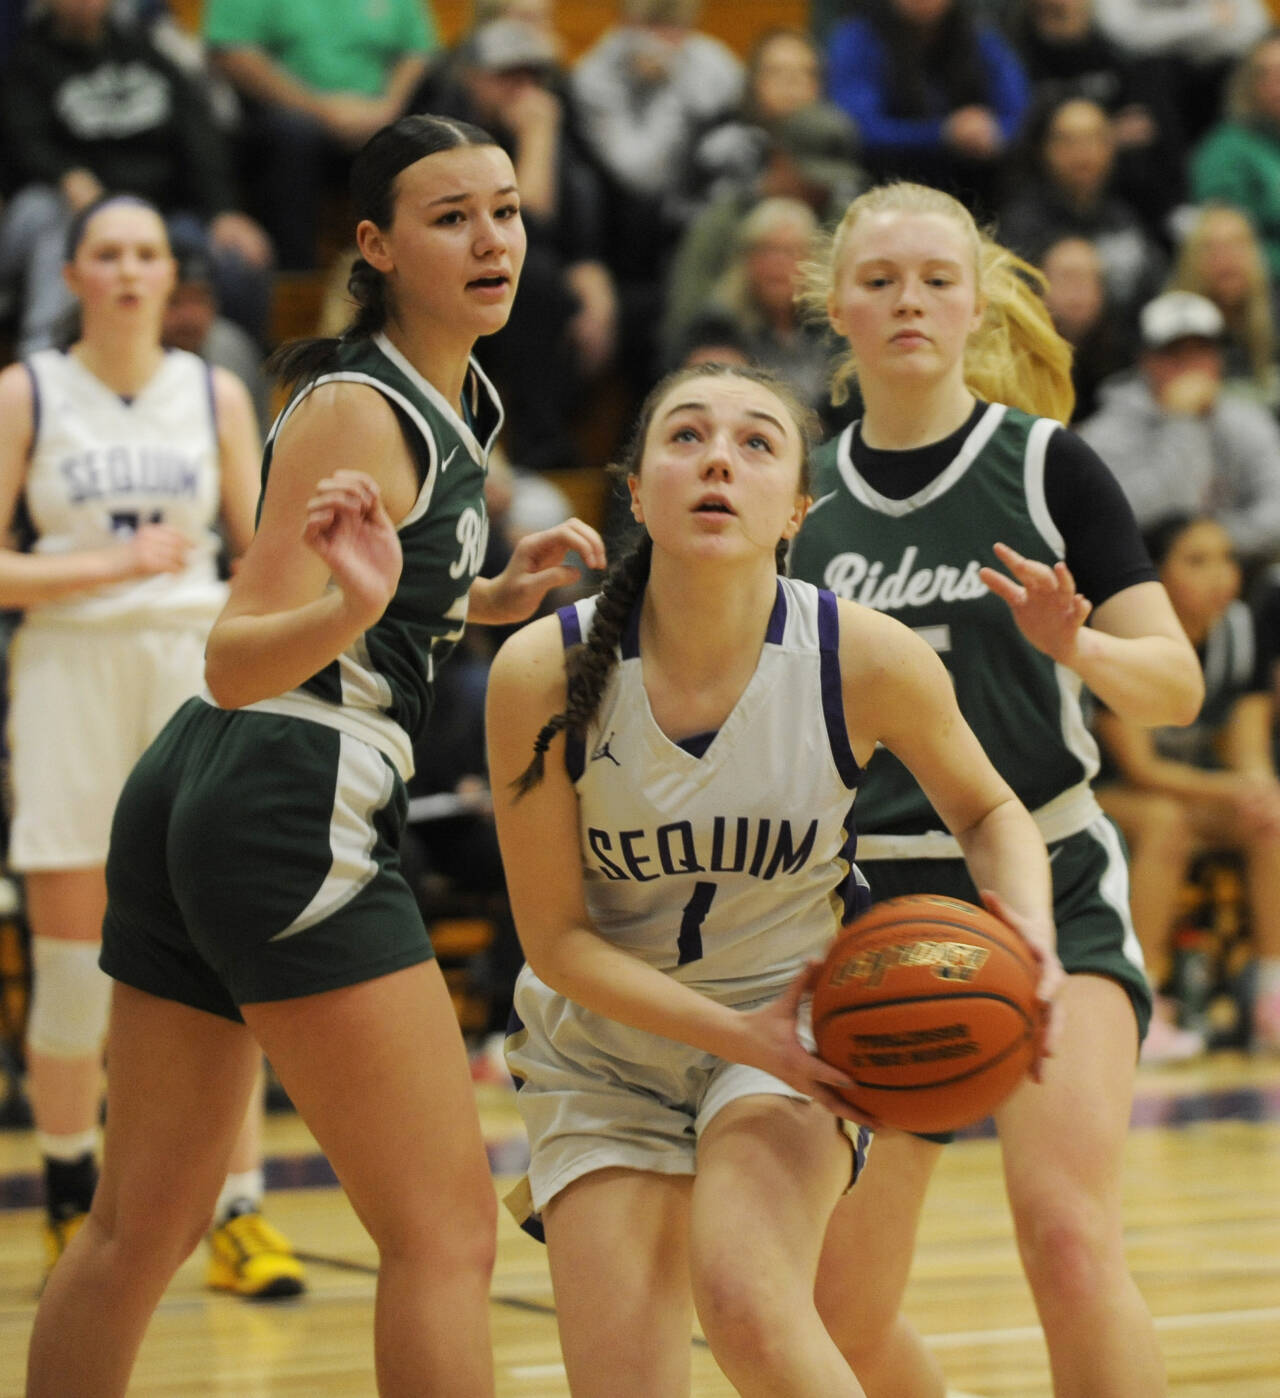 Sequim Gazette photo by Michael Dashiell
Sequim’s Taylor Heyting, center, looks to score as Port Angeles defenders Lexie Smith, left, and Paige Mason look on. PA’s Roughriders upended the host Wolves 66-64 on Jan. 11.